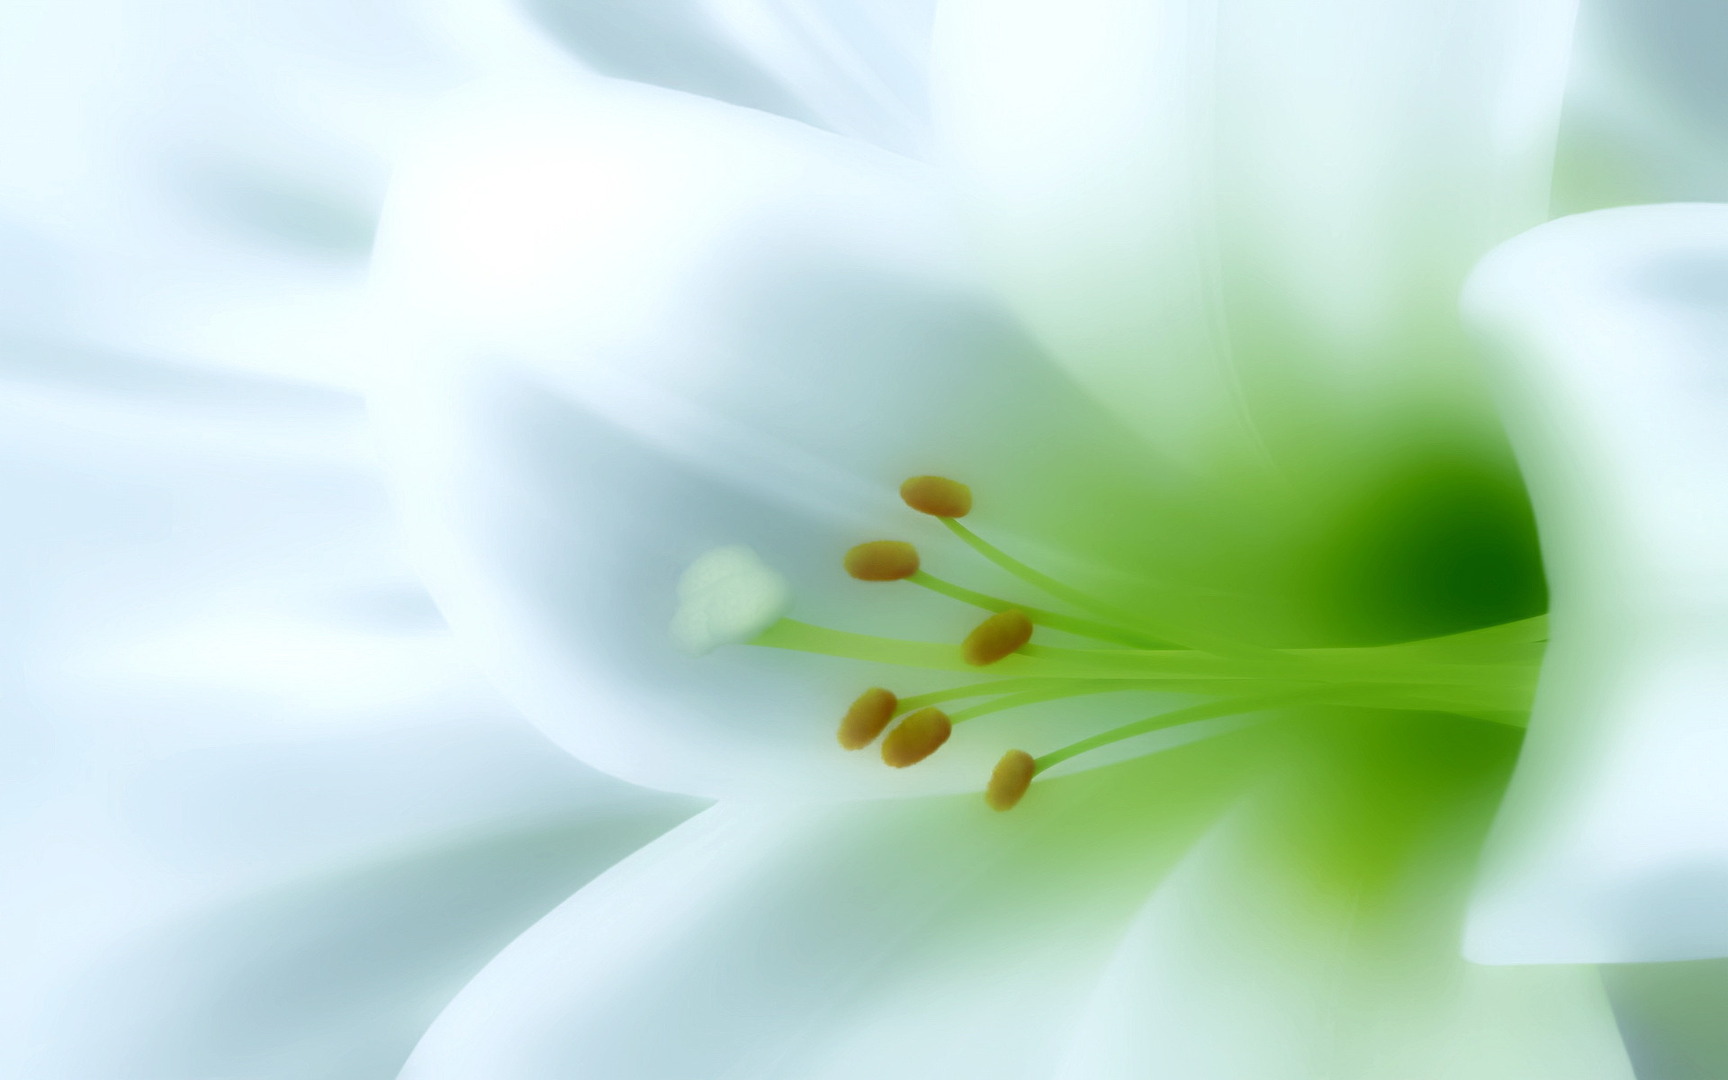 White Lily 1080p Flowers HD Wallpaper Source